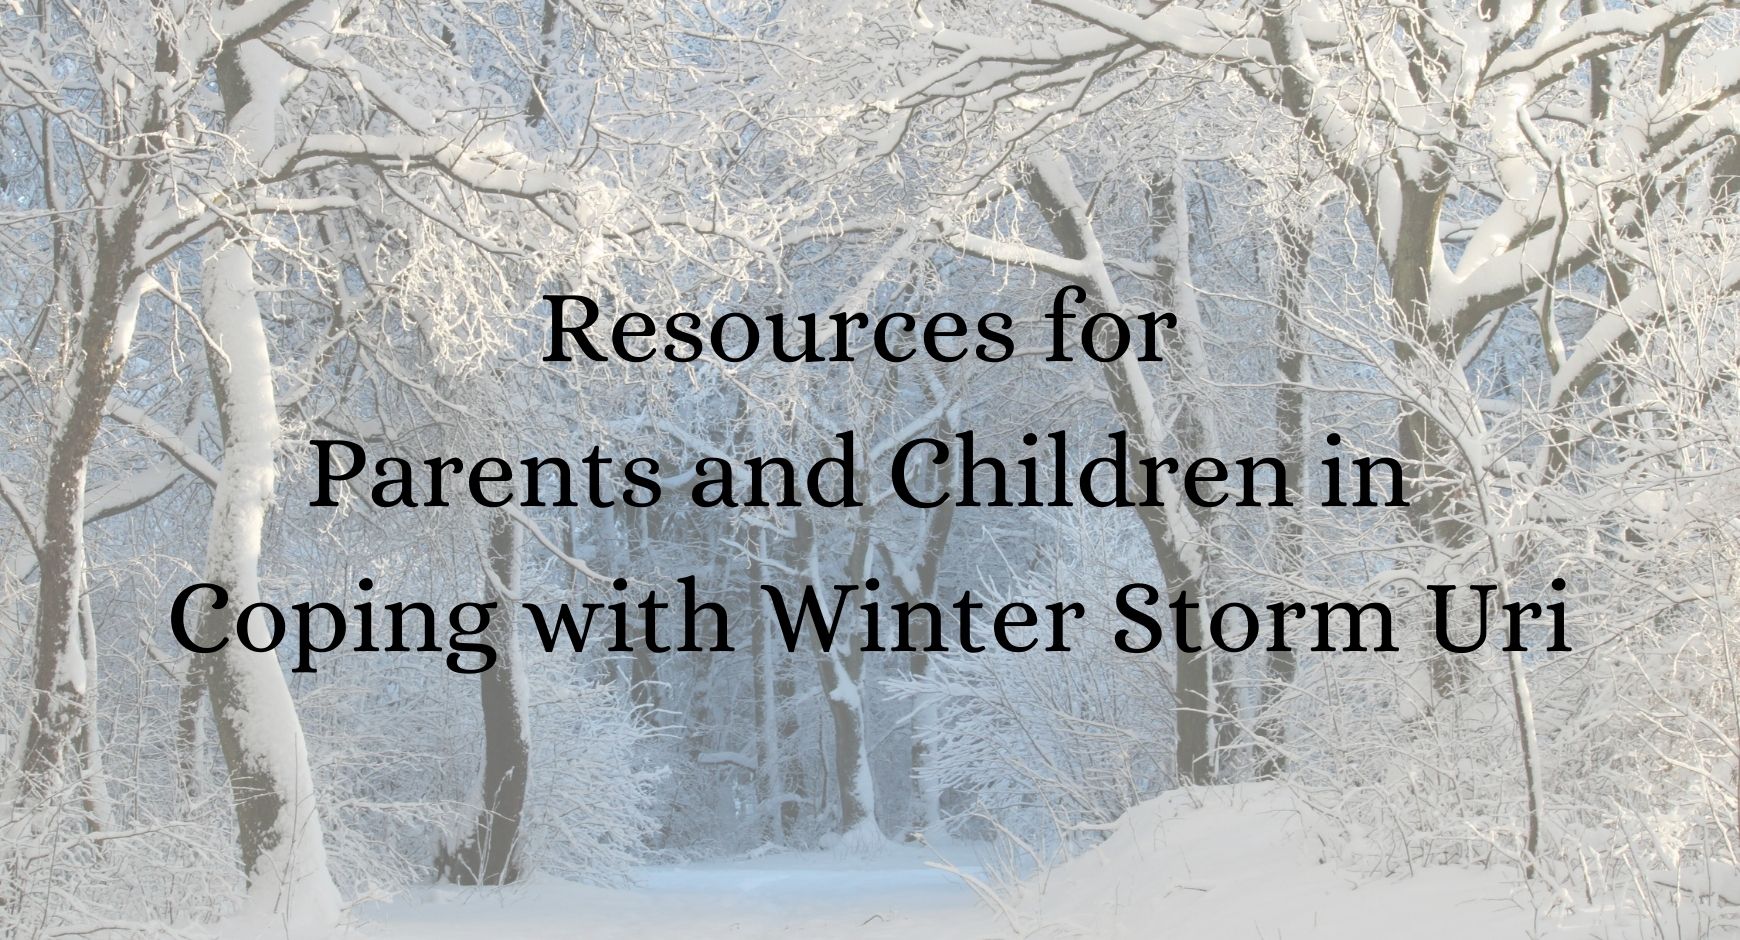 The tops of deciduous and coniferous trees are covered in snow. Text reads "Resources for Parents and Children in Coping with Winter Storm Uri"